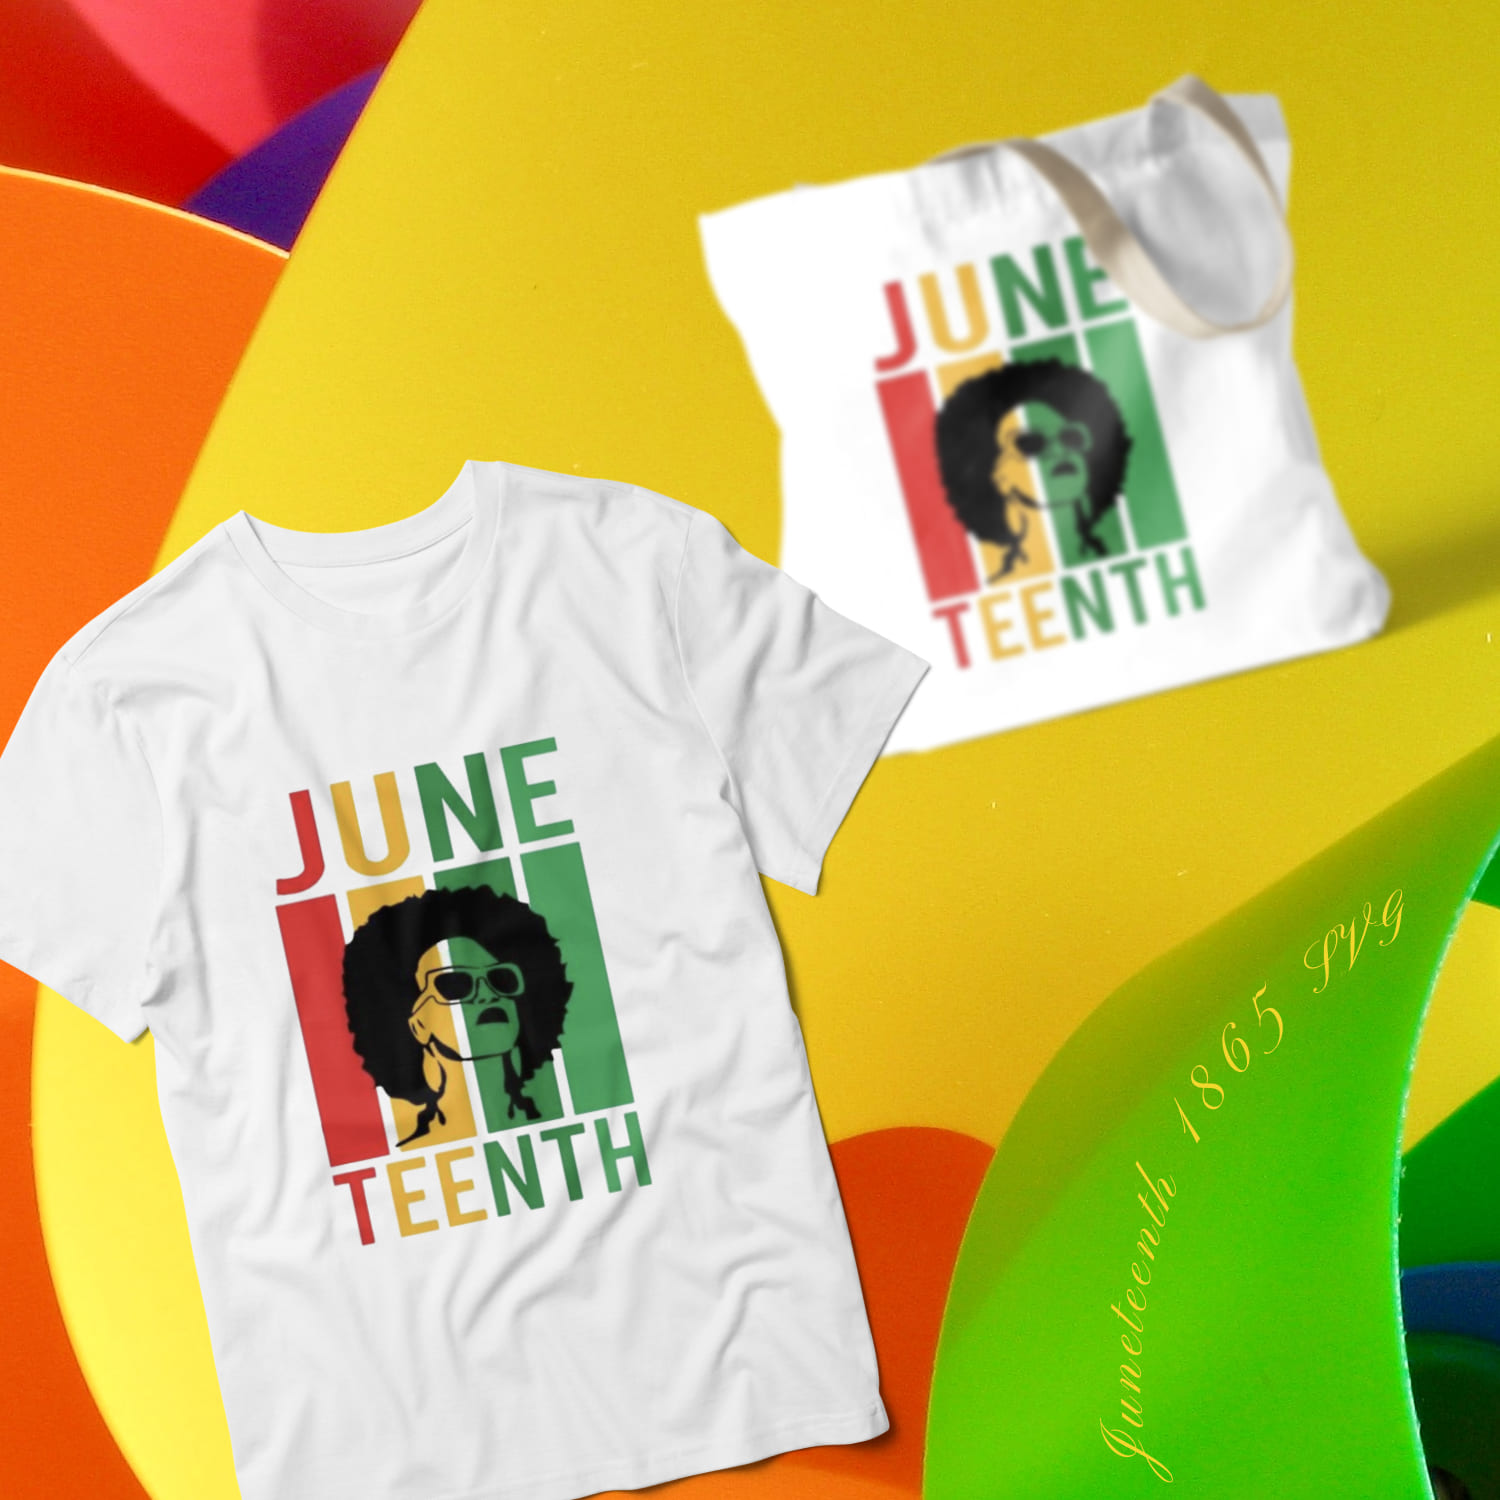 T-shirt and bag in white juneteenth print on a bright background.